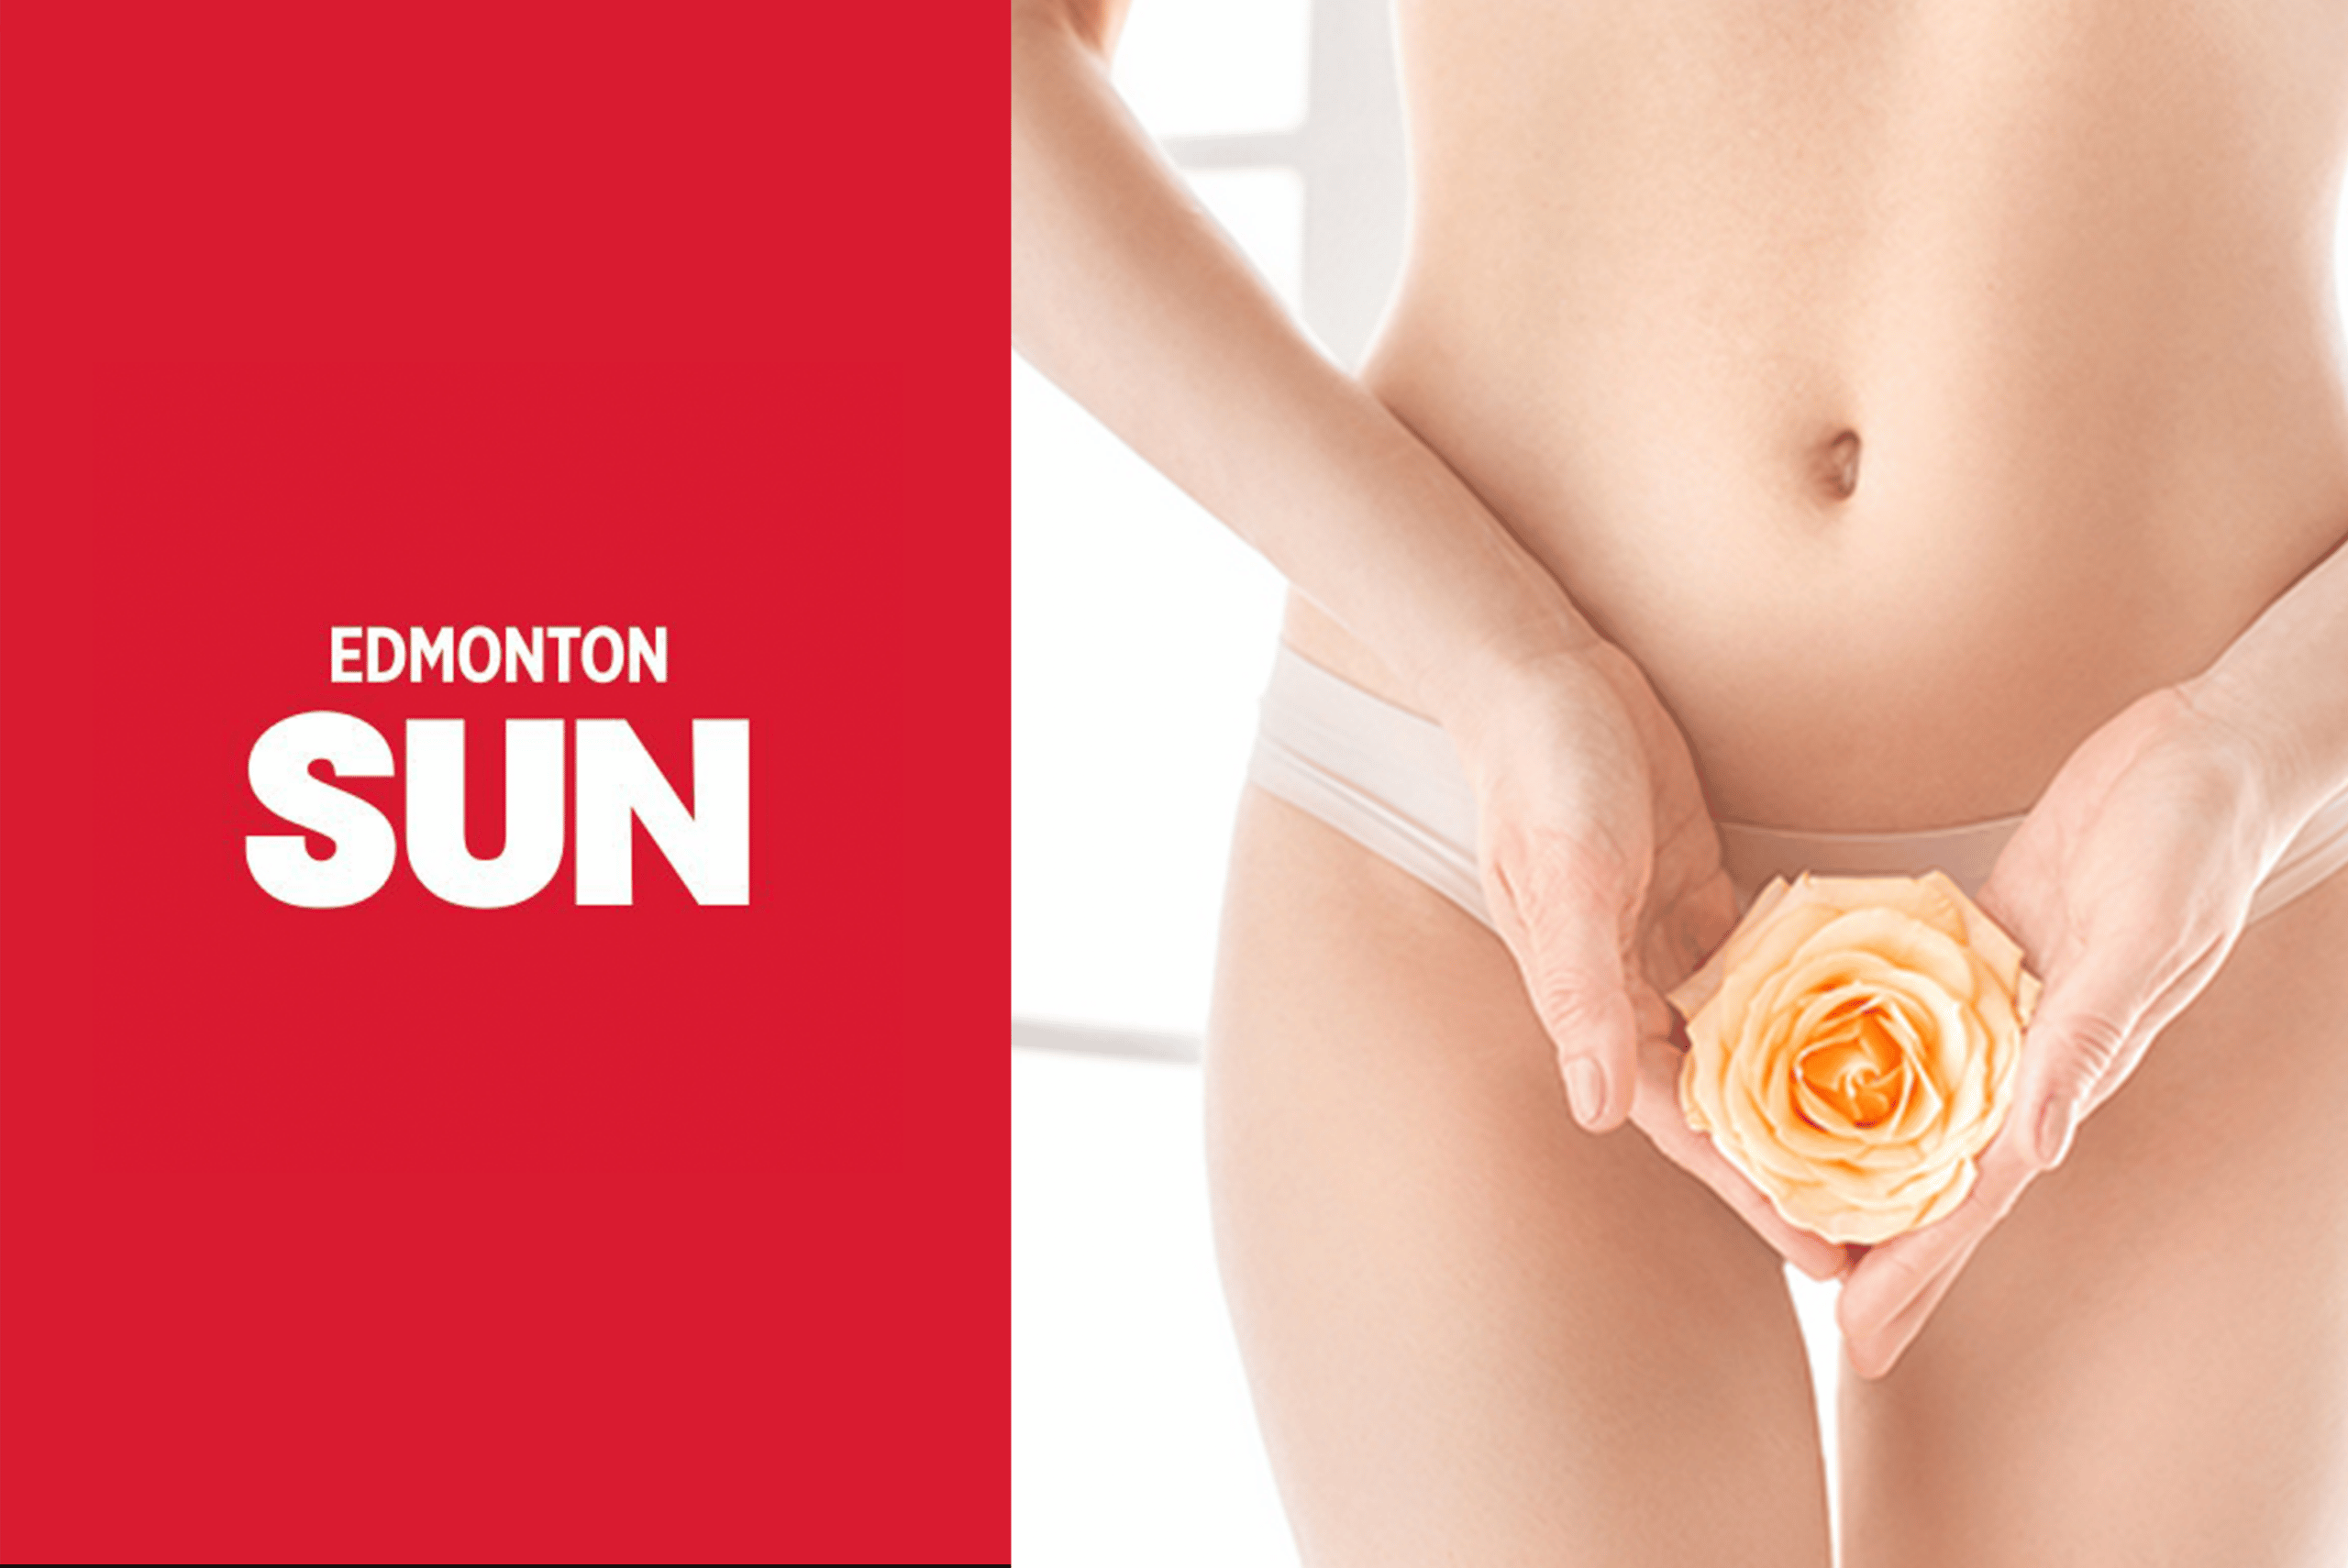 Edmonton sun Labiaplasty Article by Dr. Rose Makerwhich